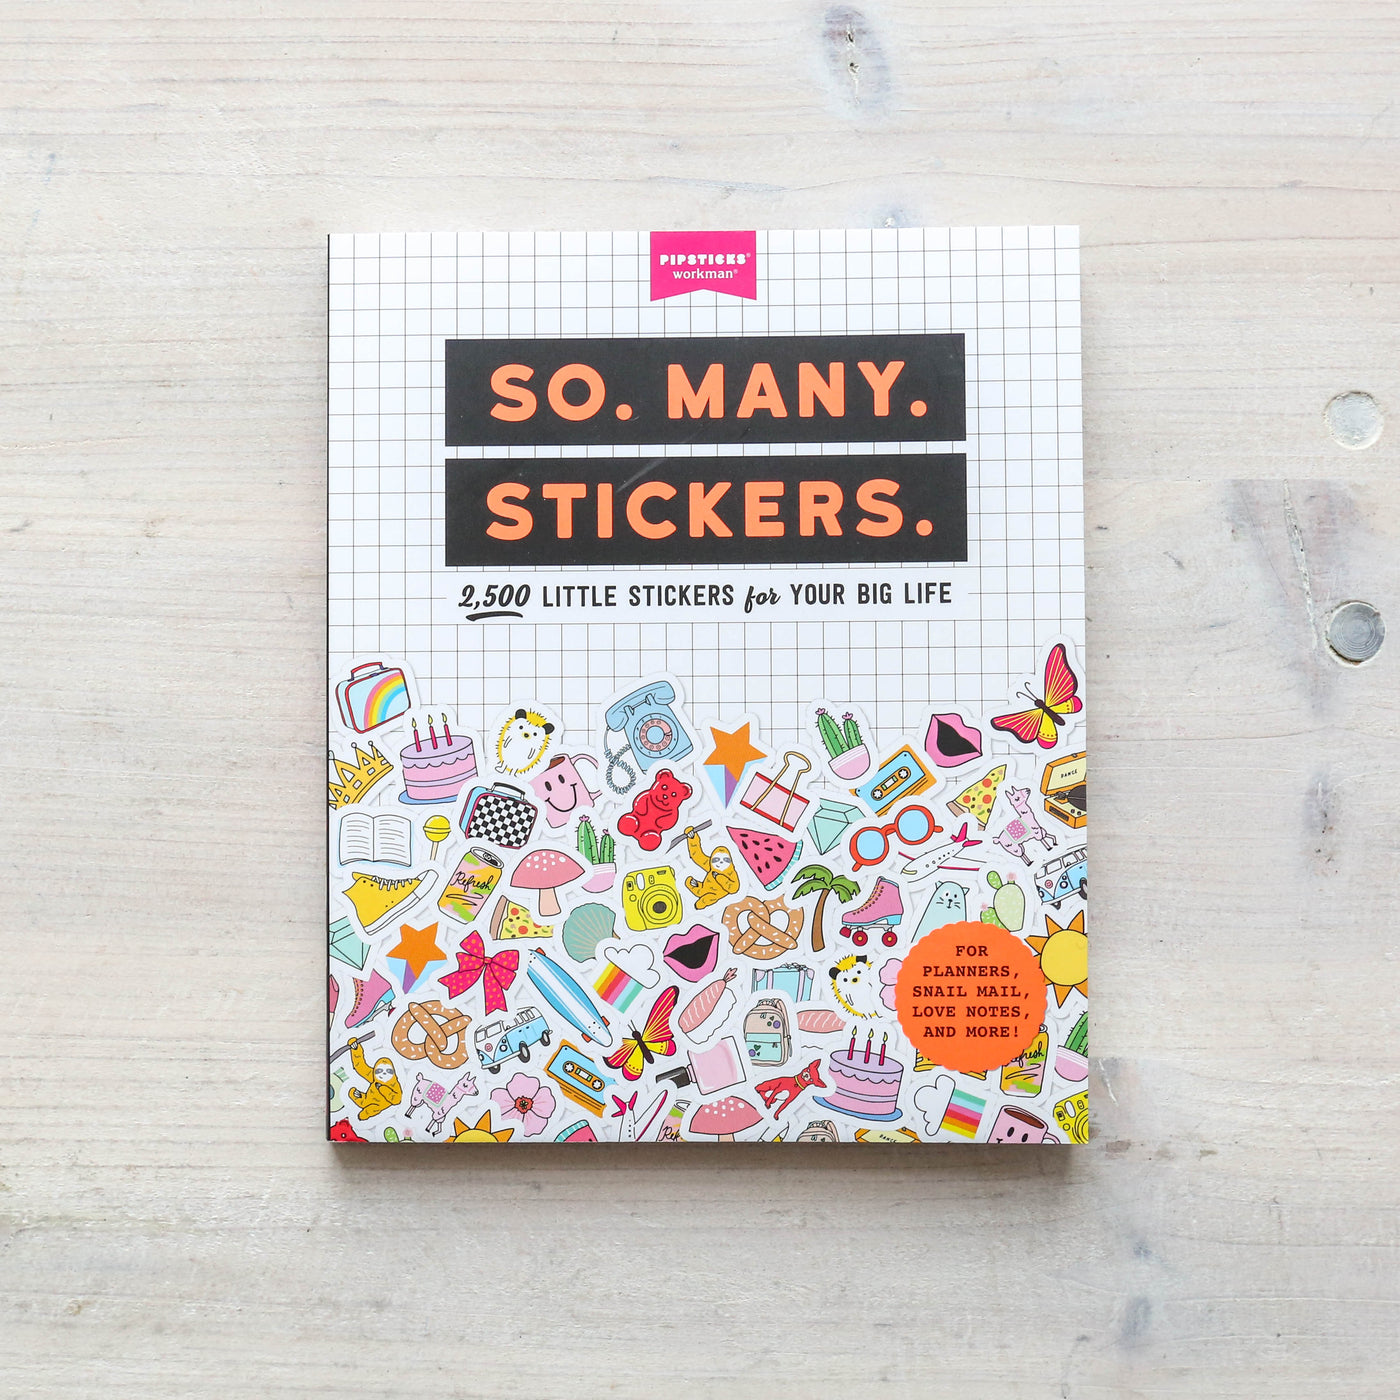 So. Many. Stickers from Pipsticks